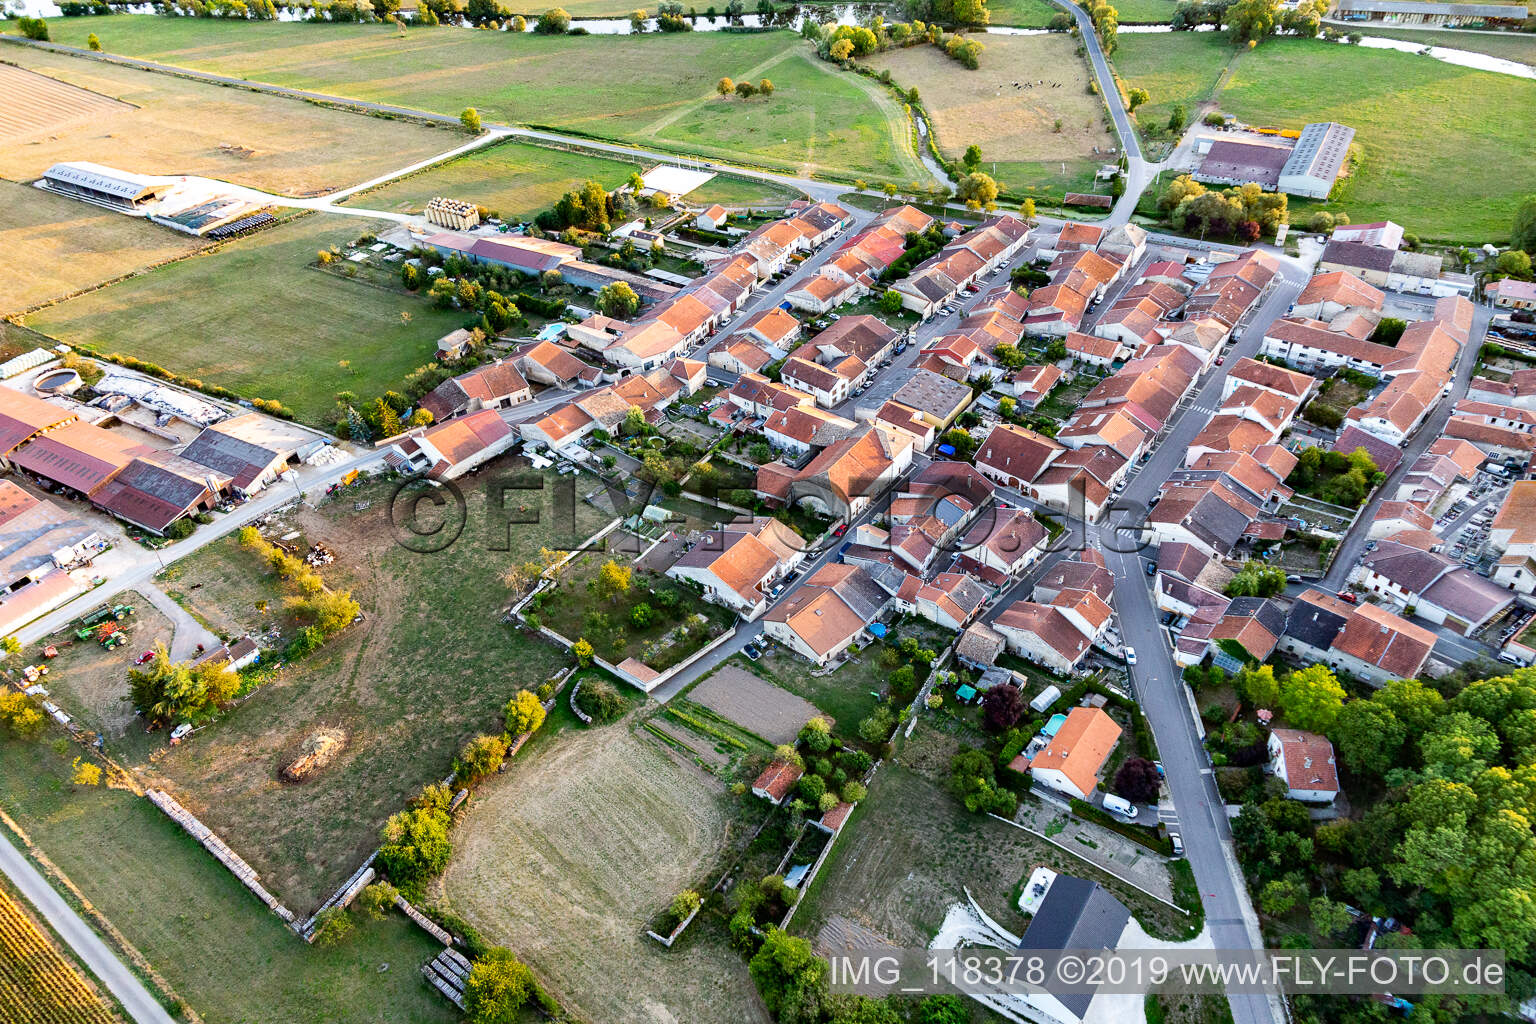 Aerial photograpy of Pagny-la-Blanche-Côte in the state Meuse, France